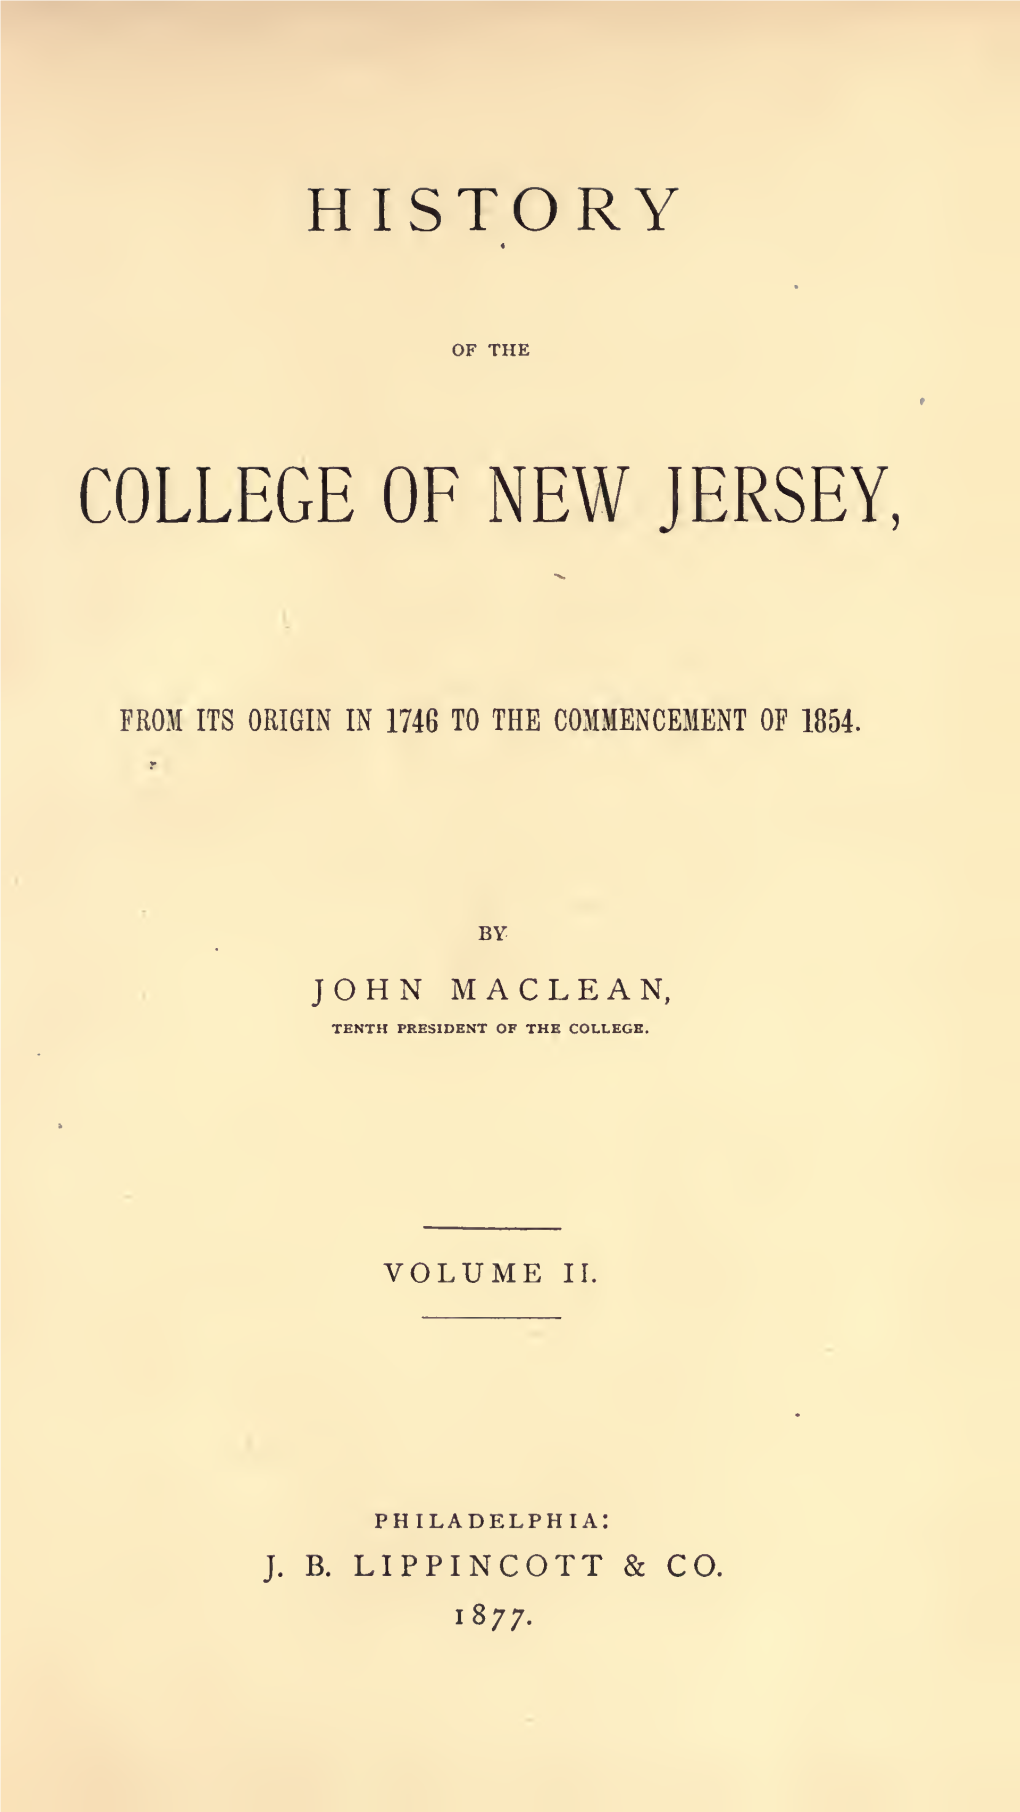 History of the College of New Jersey, from Its Origin in 1746 to The